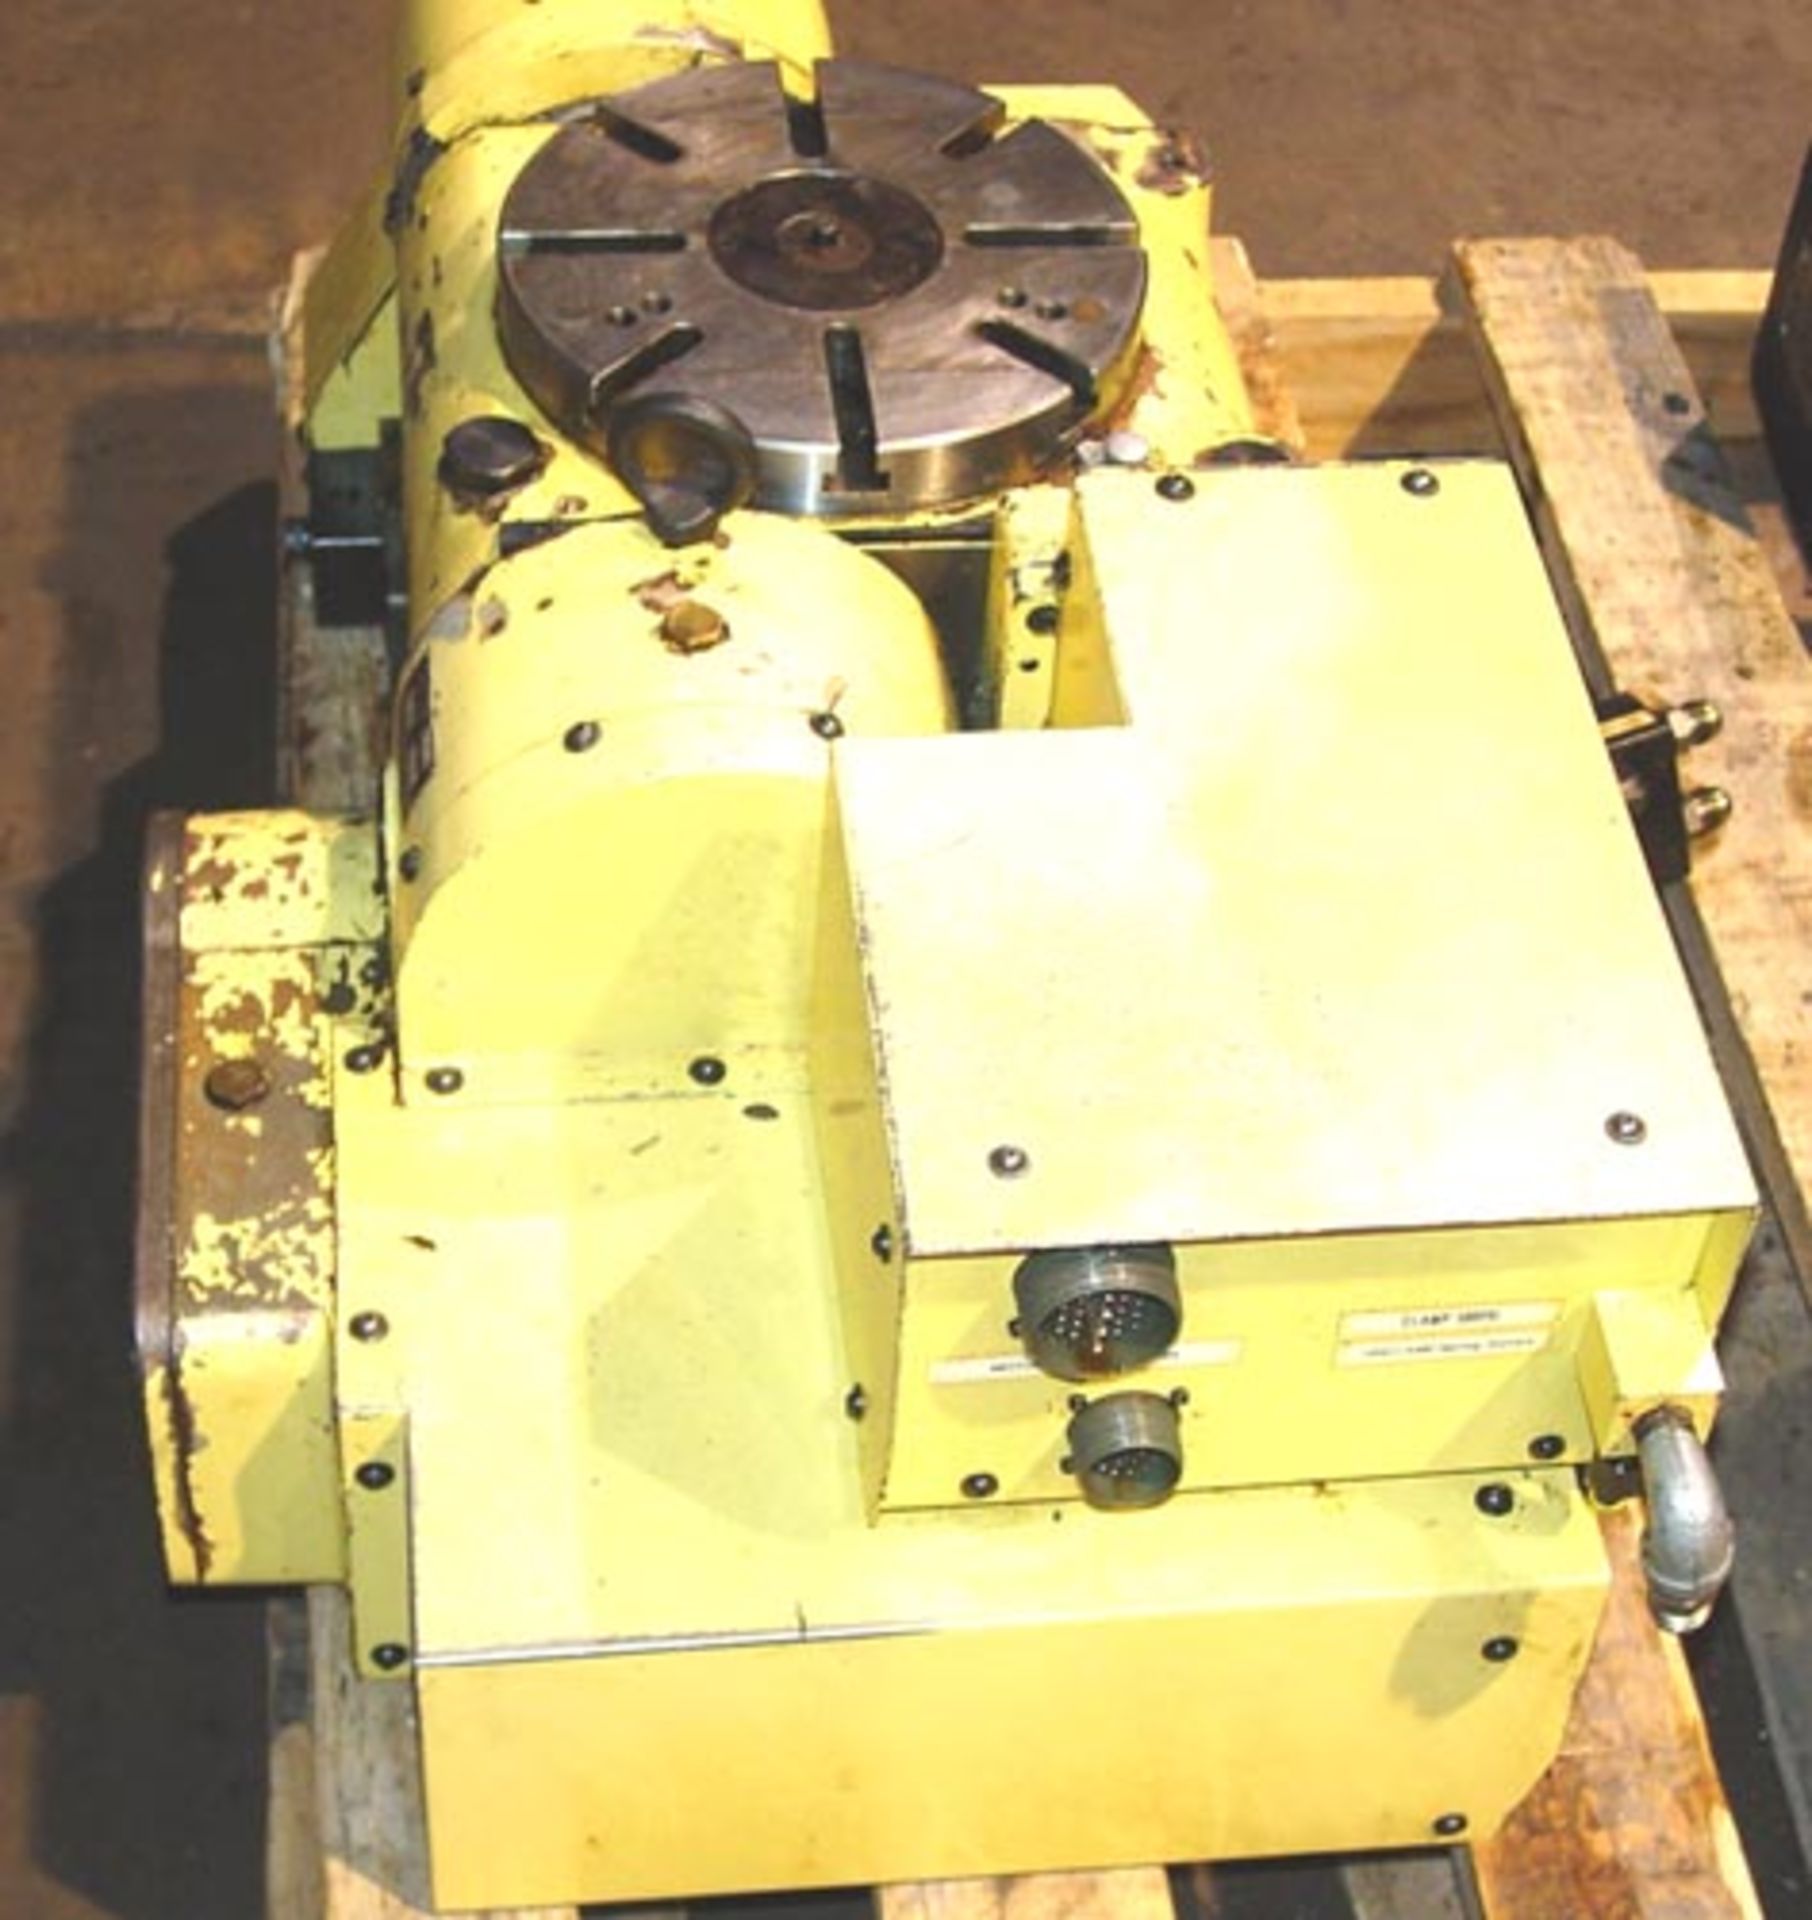 9" NIKKEN 4TH AND 5TH AXIS CNC ROTARY TABLE,  Model: 5AX-230, S/N 5022 - Image 3 of 4